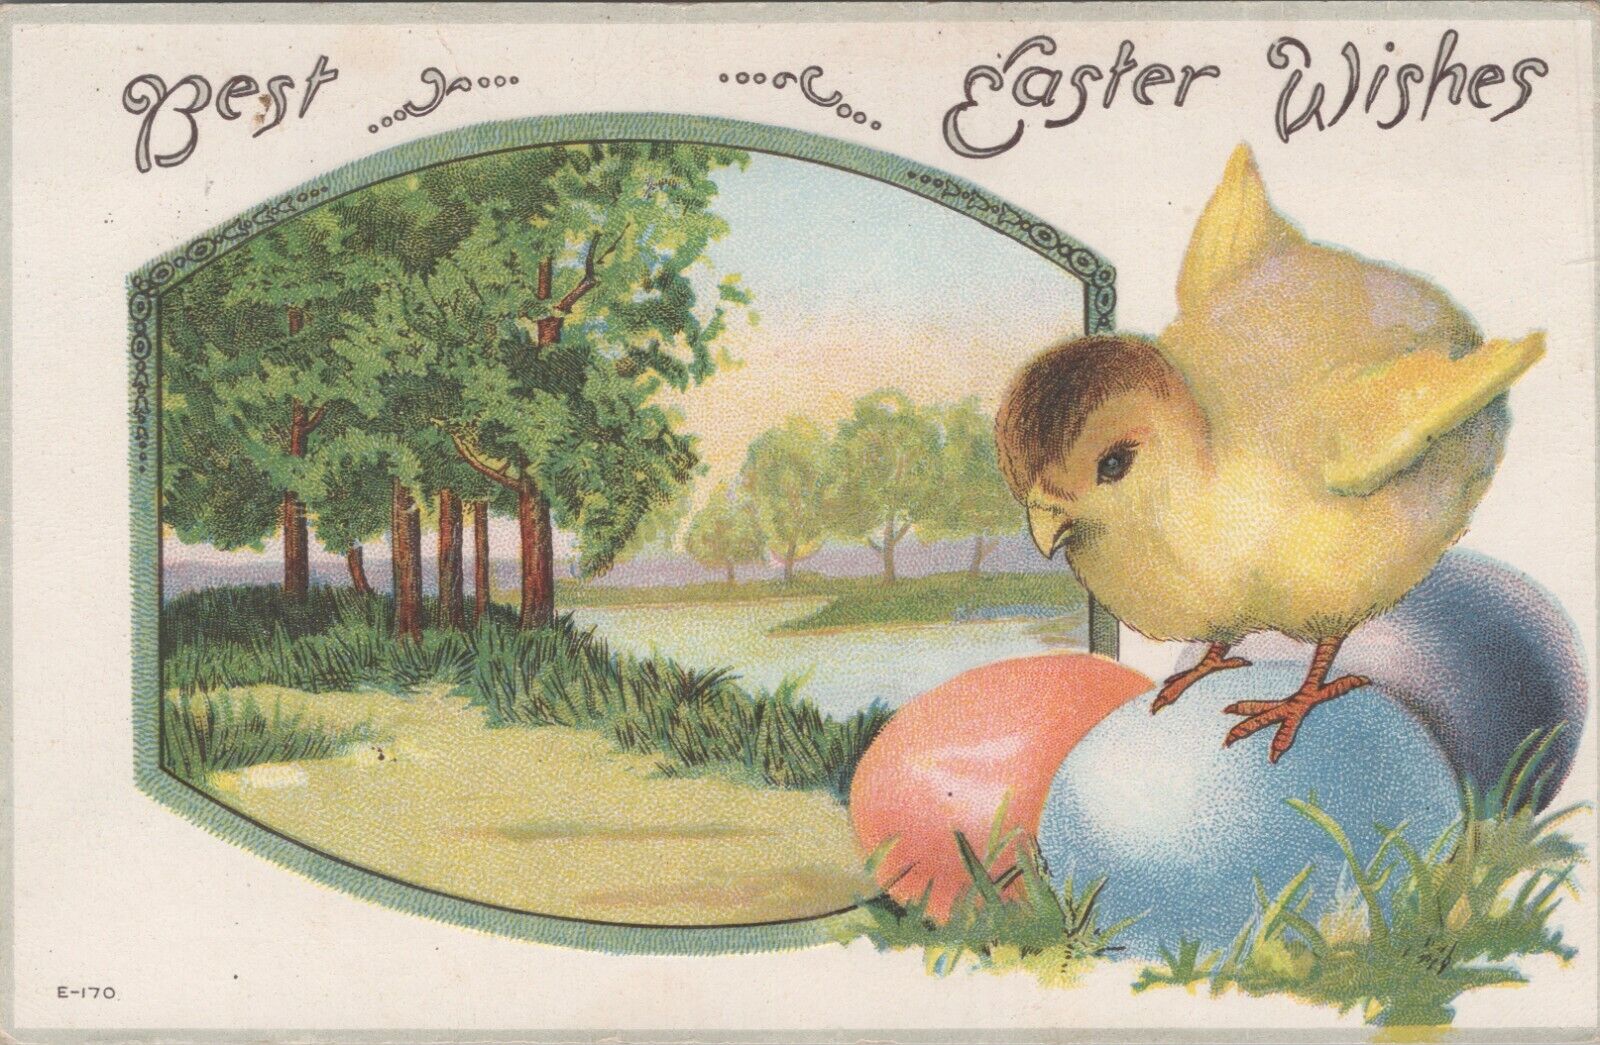 Easter Wishes chick balancing on eggs scene embossed c1910-1920 postcard C612